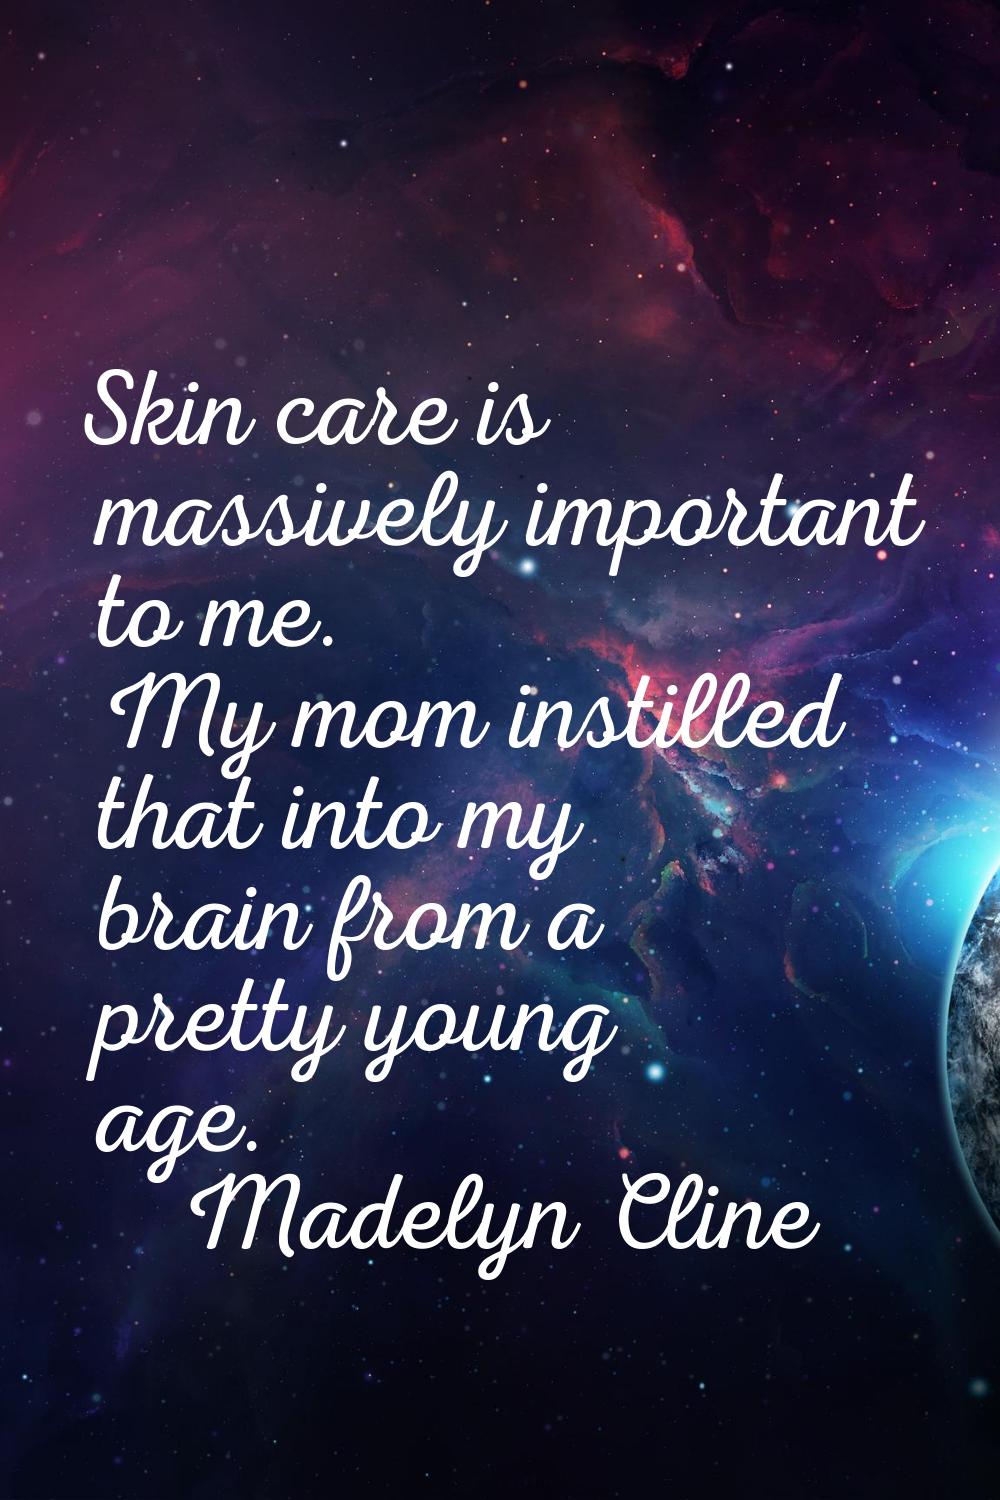 Skin care is massively important to me. My mom instilled that into my brain from a pretty young age